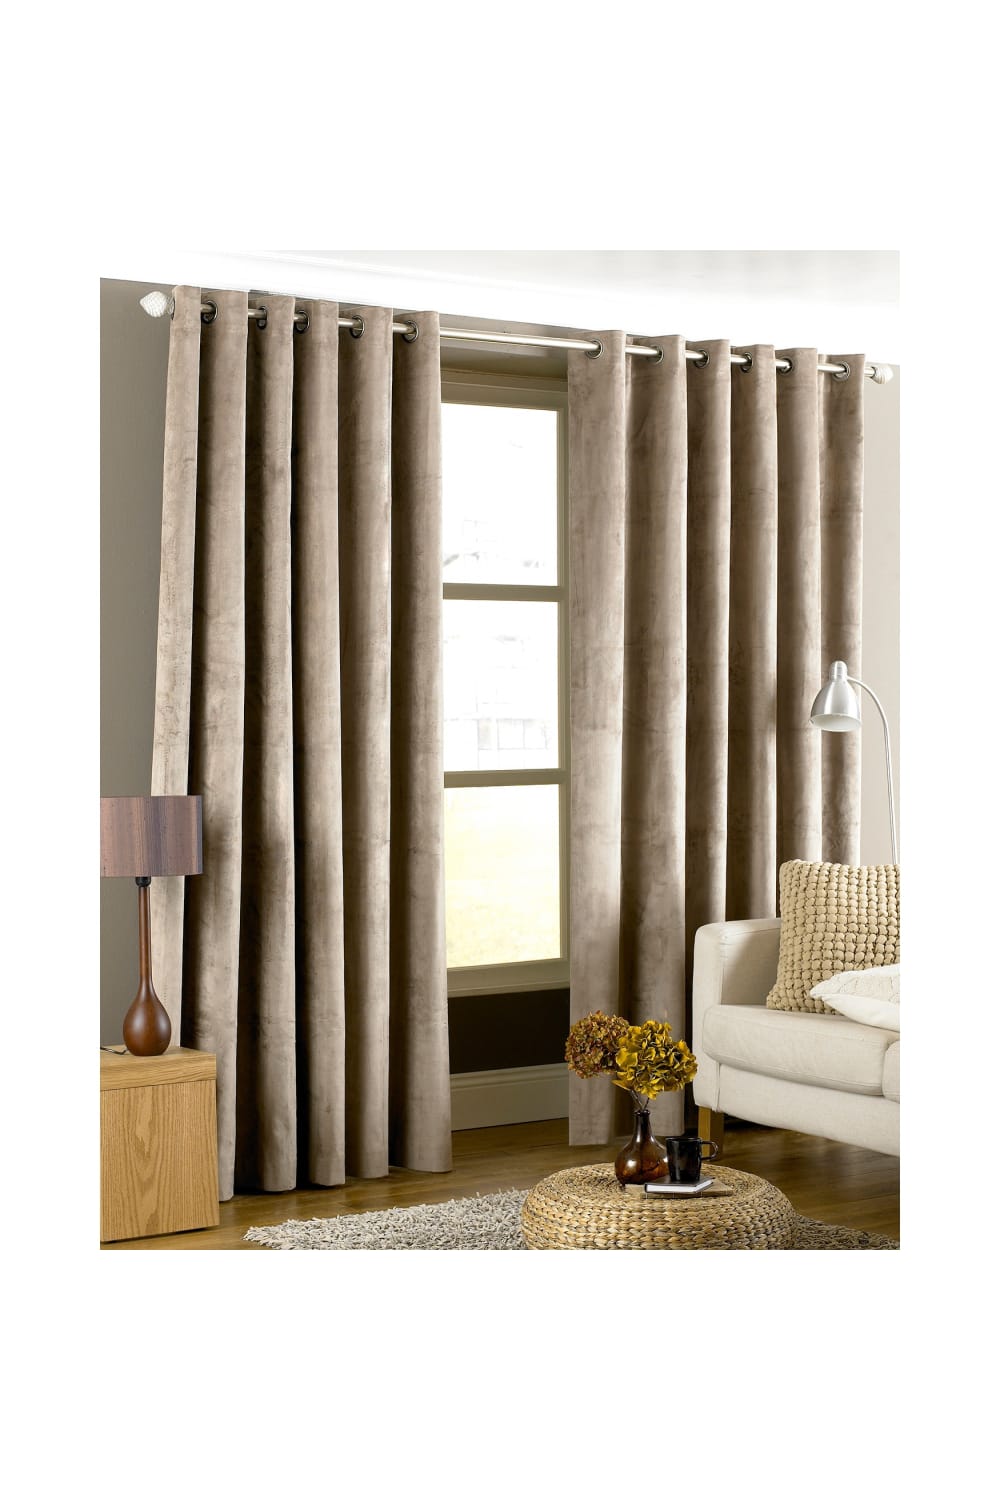 Riva Home Imperial Ringtop Curtains (Taupe) (46 x 54 inch)